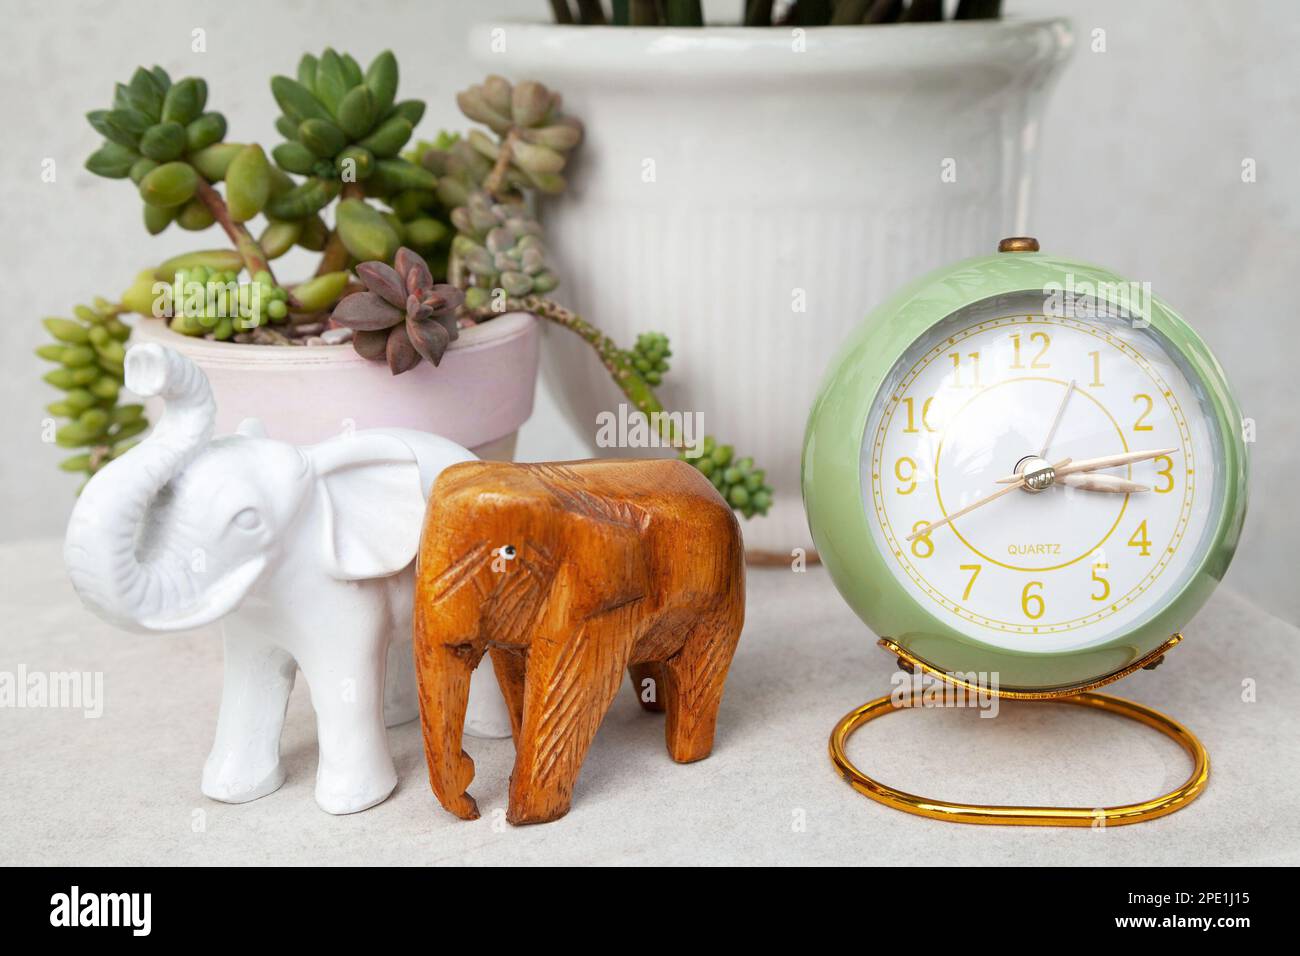 Green vintage style alarm clock showing time in the afternoon. Stylish round clock, elephant figurines and potted succulent plants on a bedside table Stock Photo